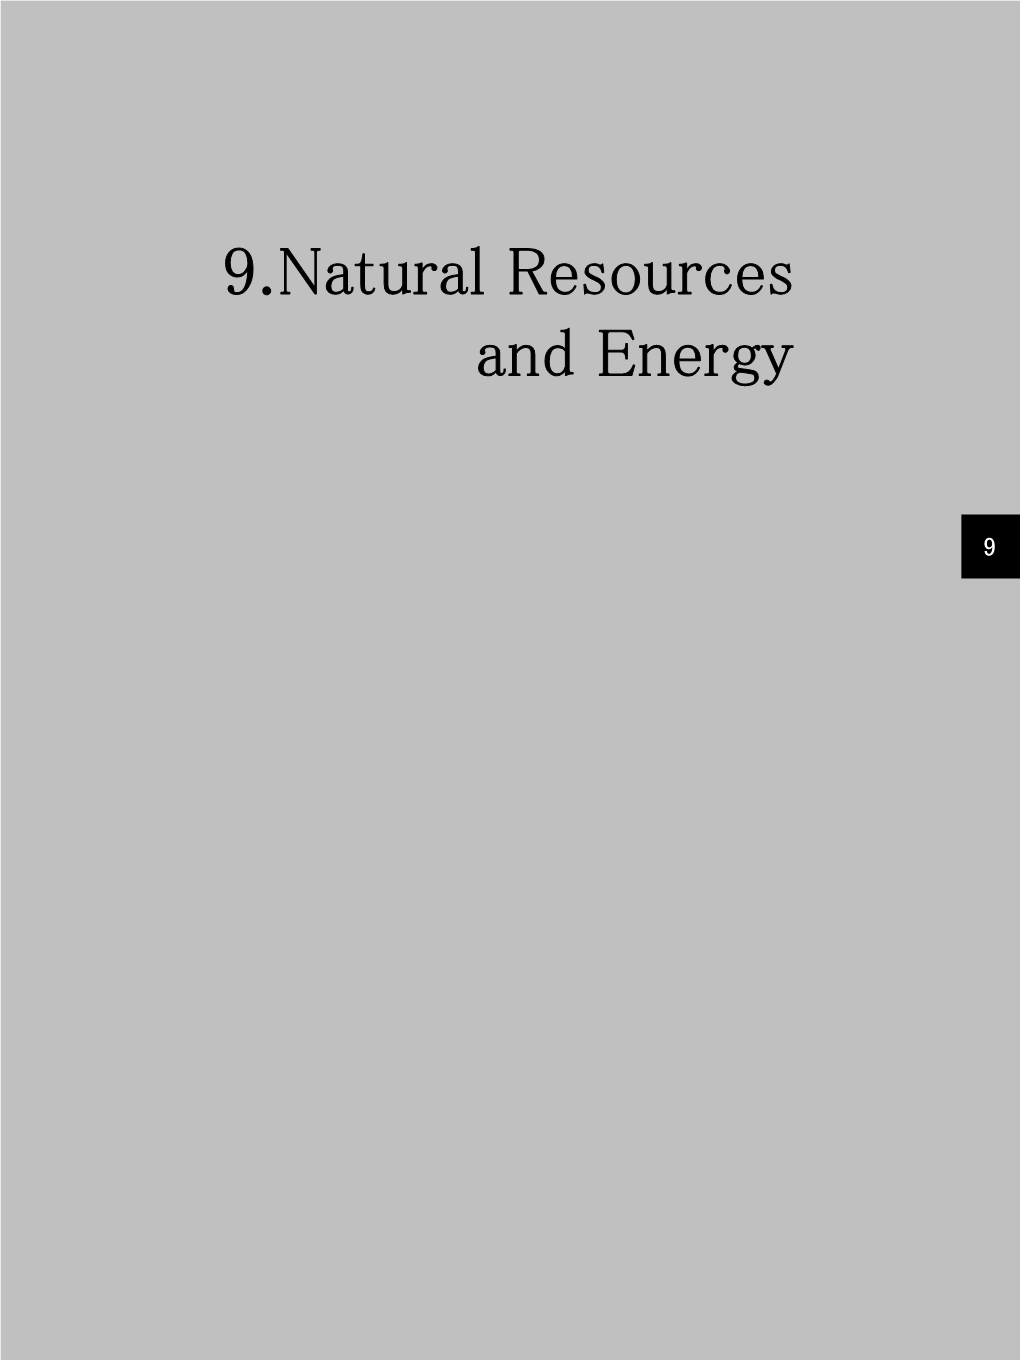 9.Natural Resources and Energy